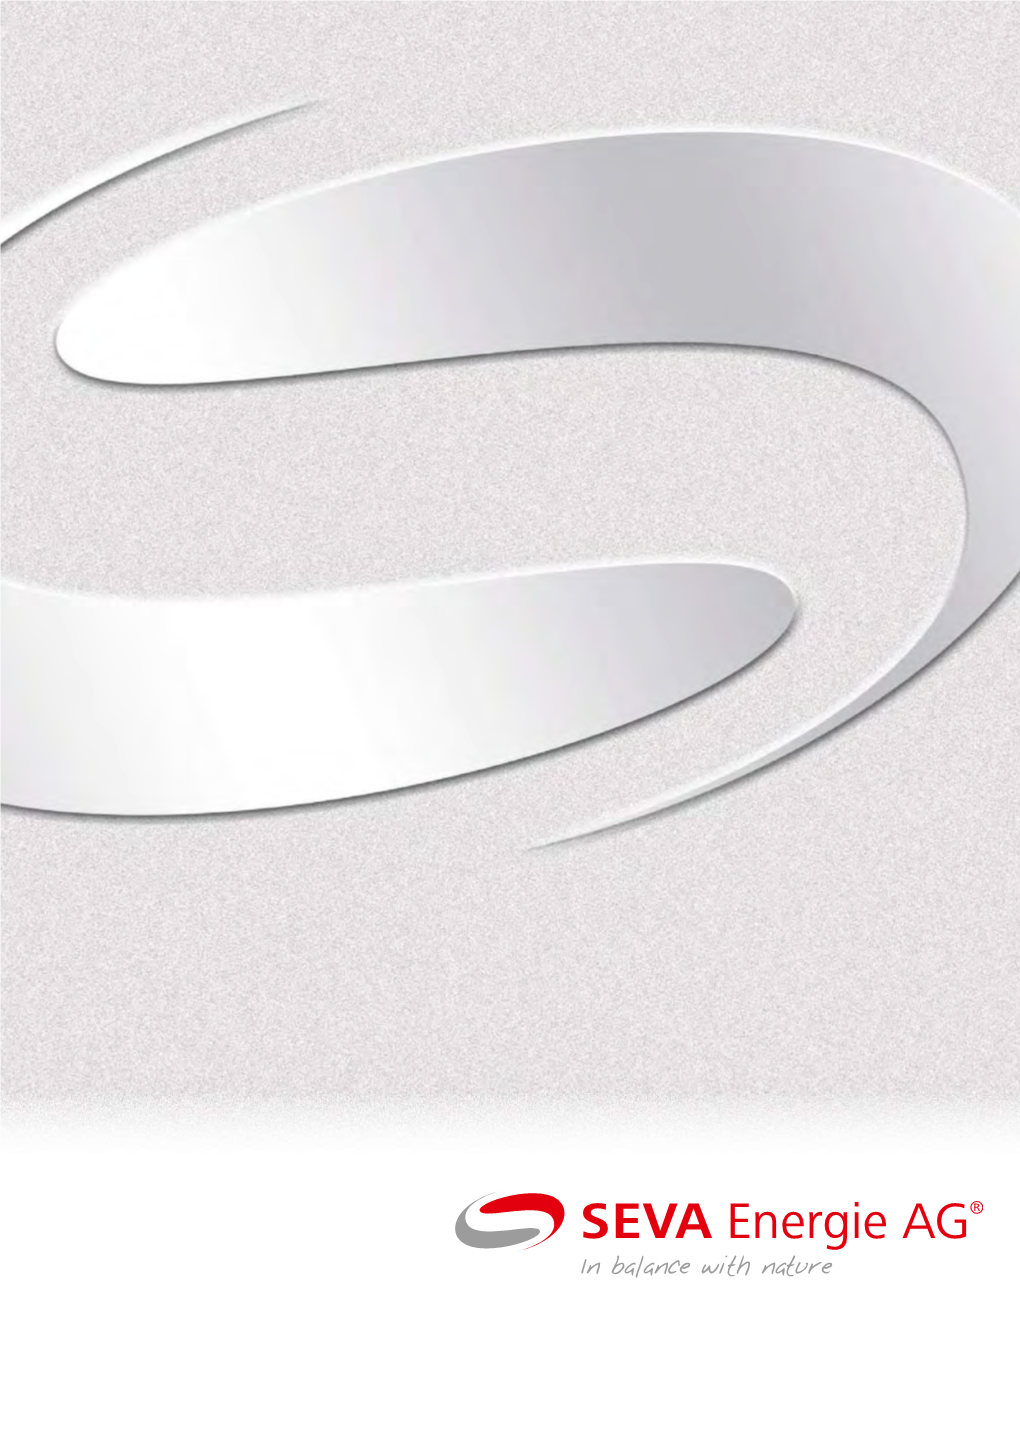 SEVA Energie AG® in Balance with Nature